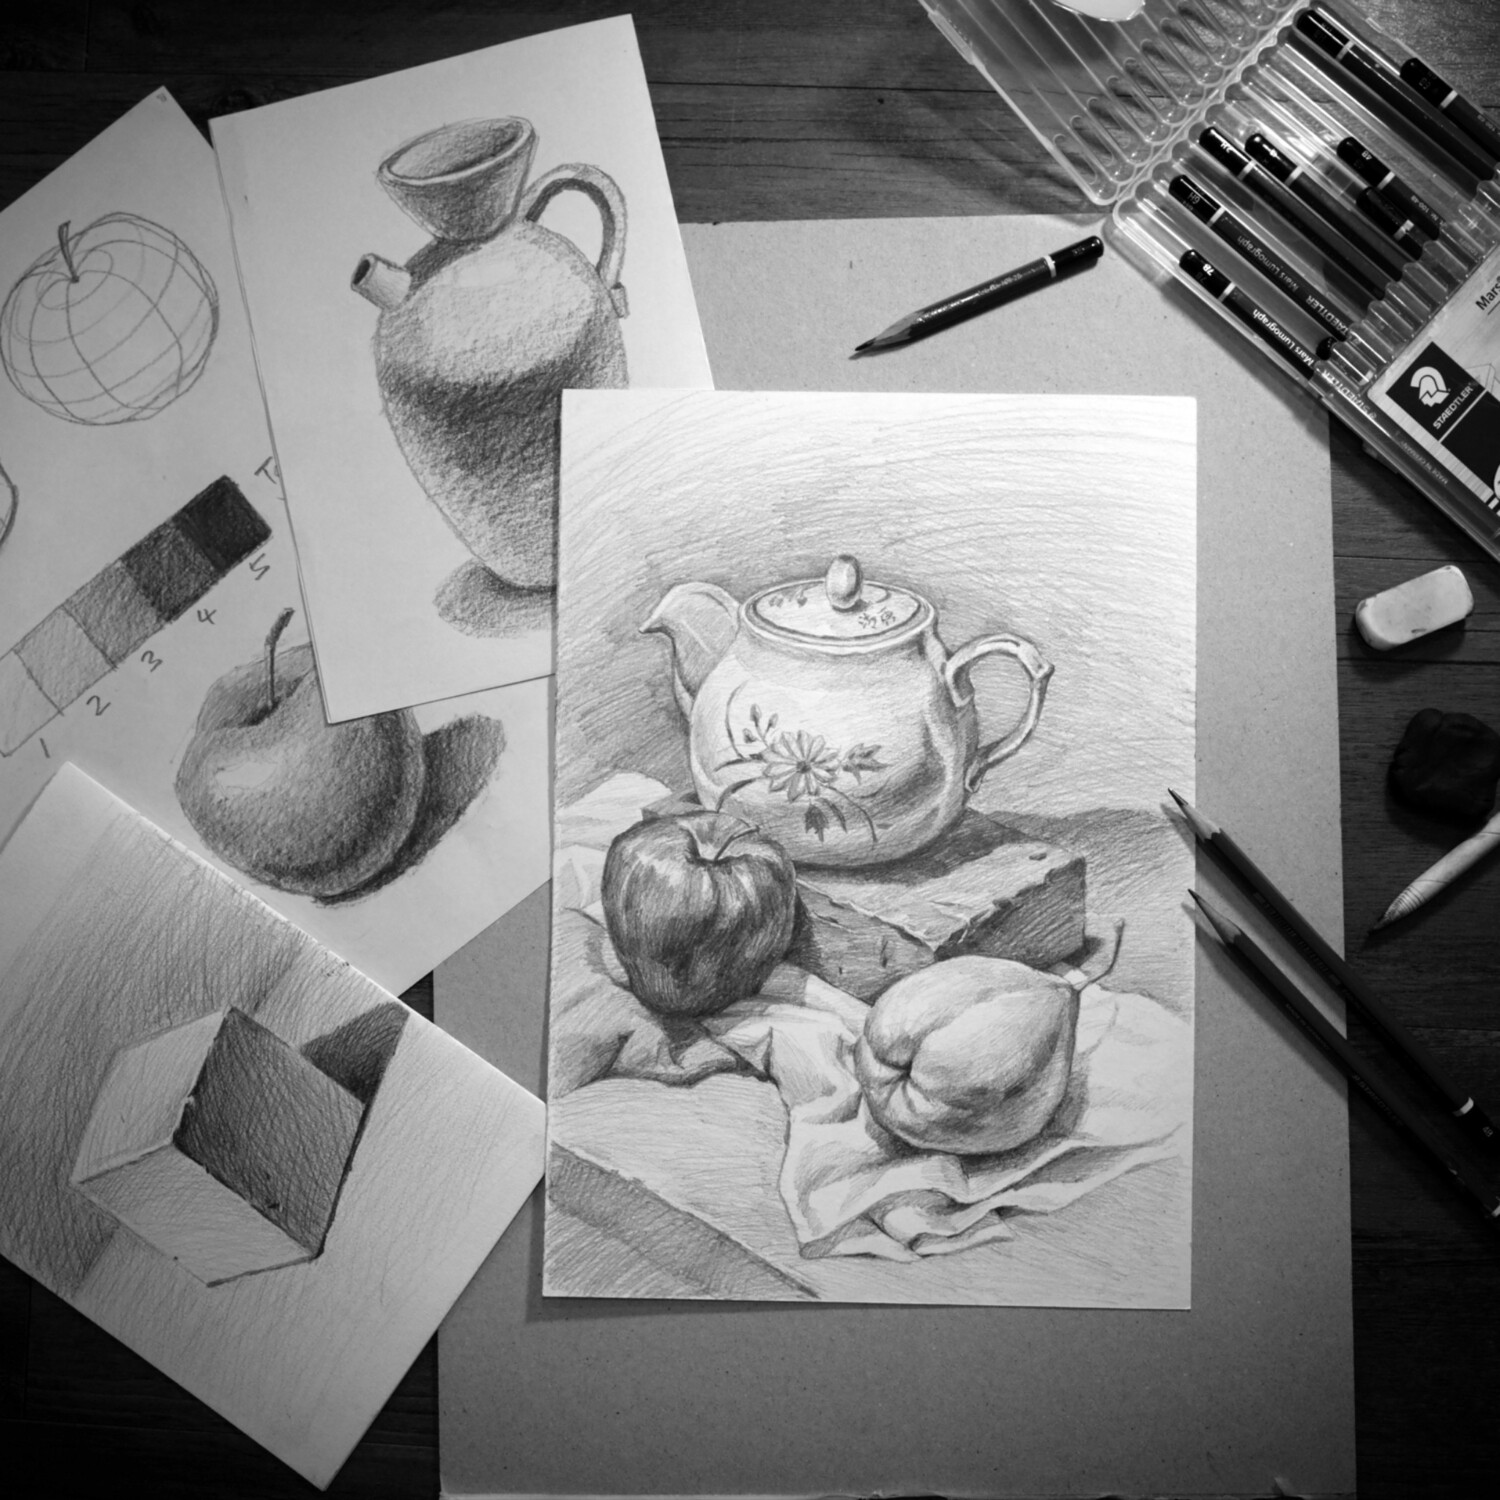 How to draw still life drawing - YouTube